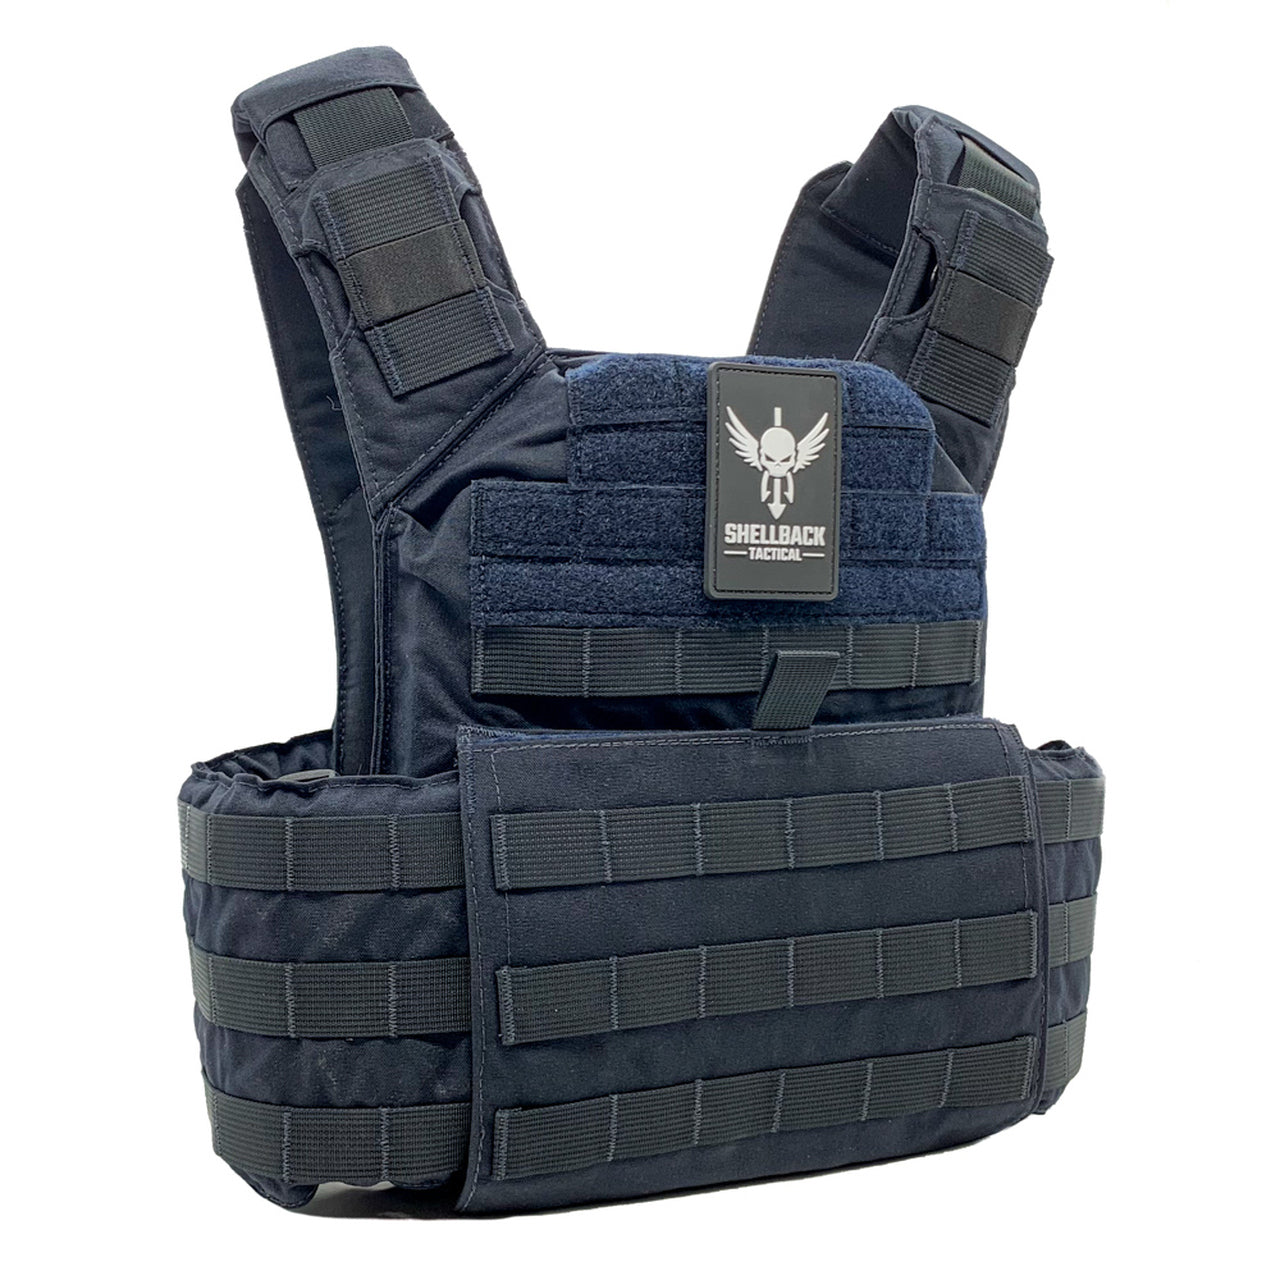 An image of the Shellback Tactical Banshee Rifle Plate Carrier on a white background.